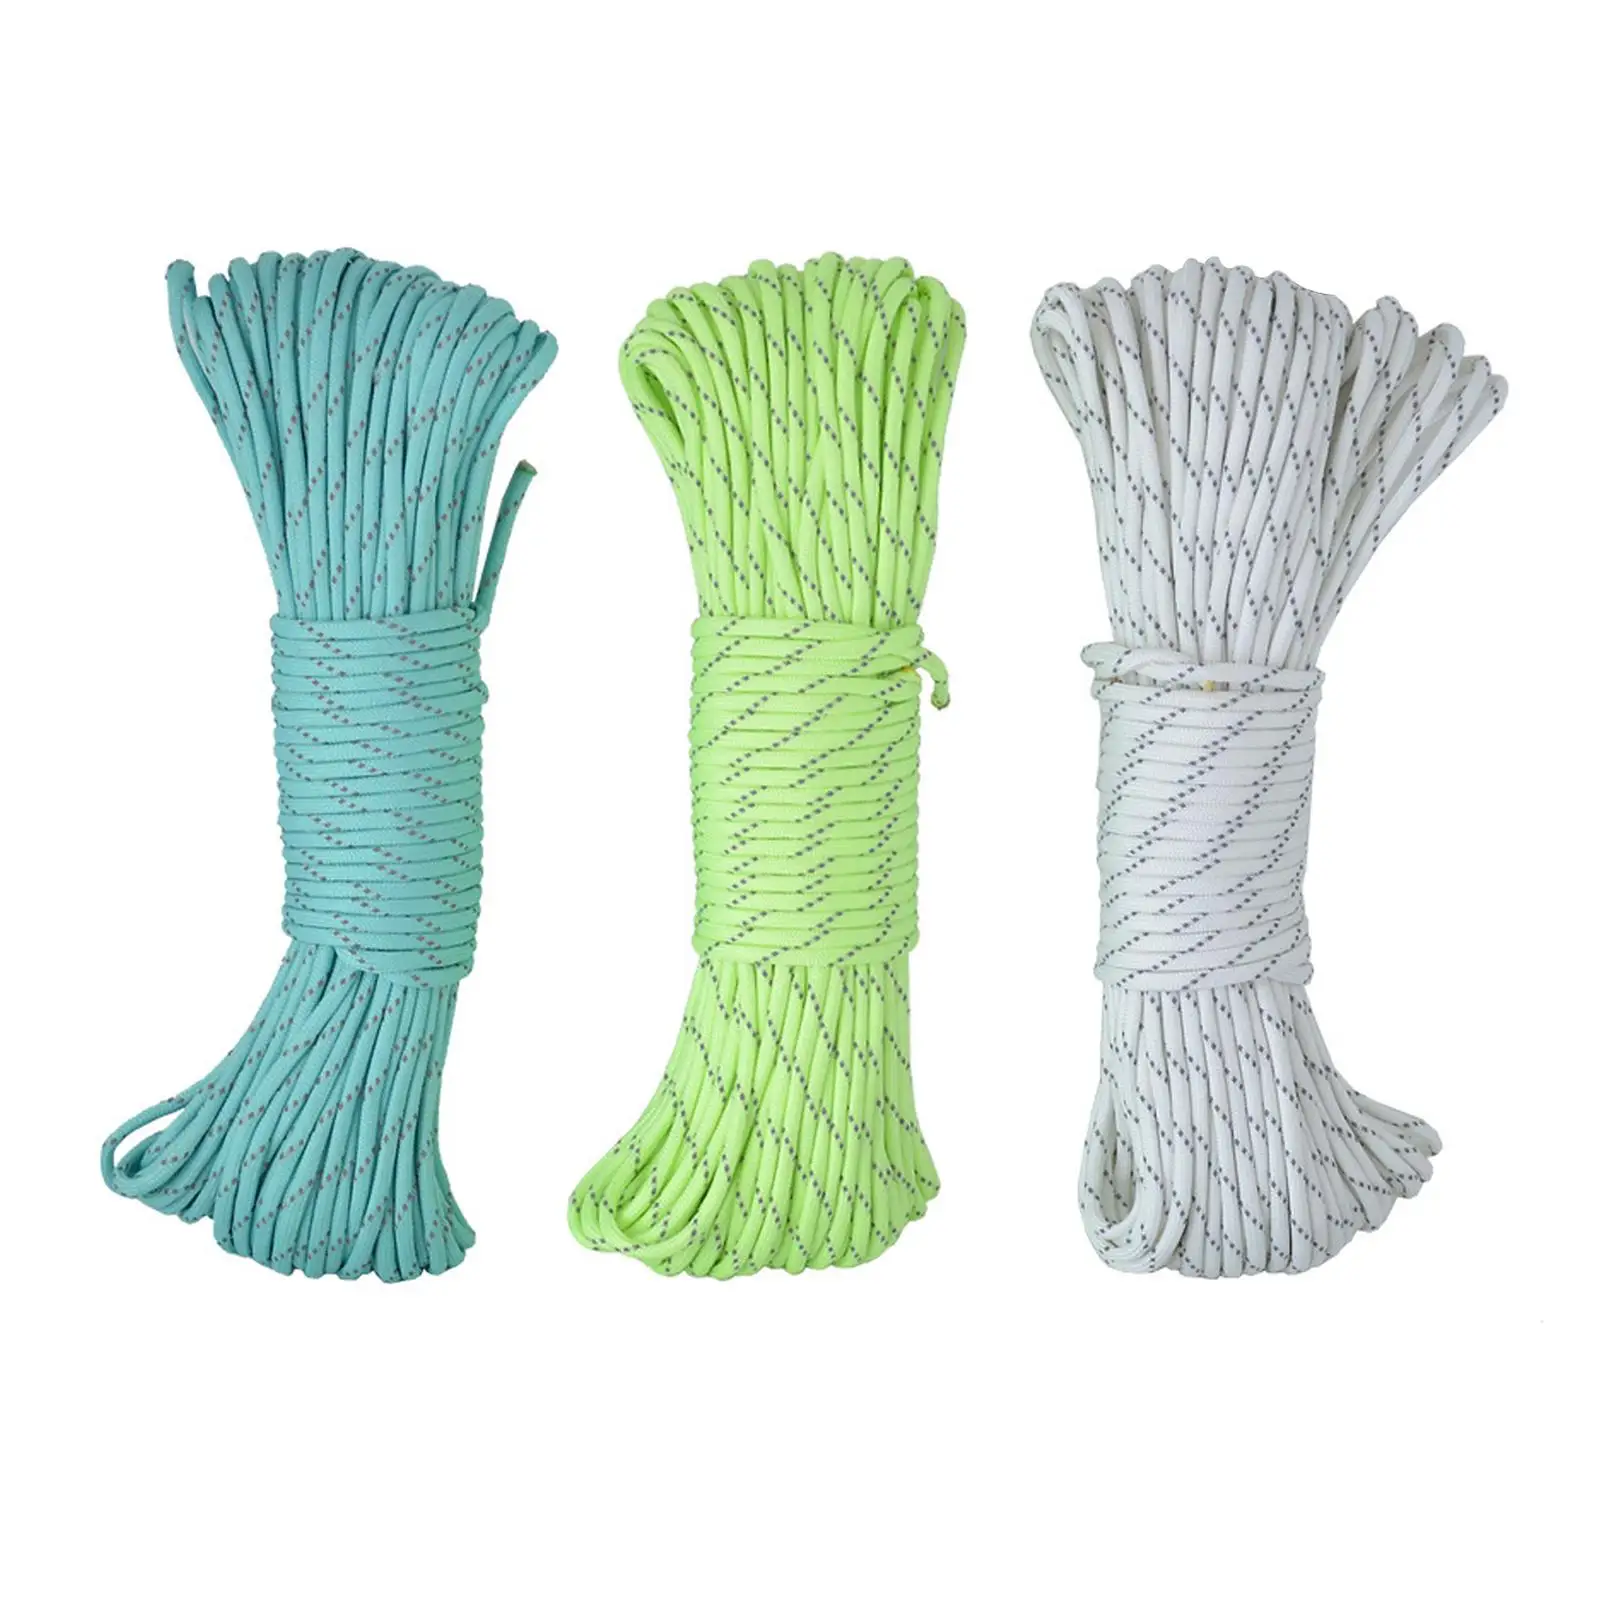 Parachute Cord 101 ft Outdoor Luminous Rope Tent Camping Rope Tent Cord for Bracelet Braiding Tent Camping Hiking Accessories